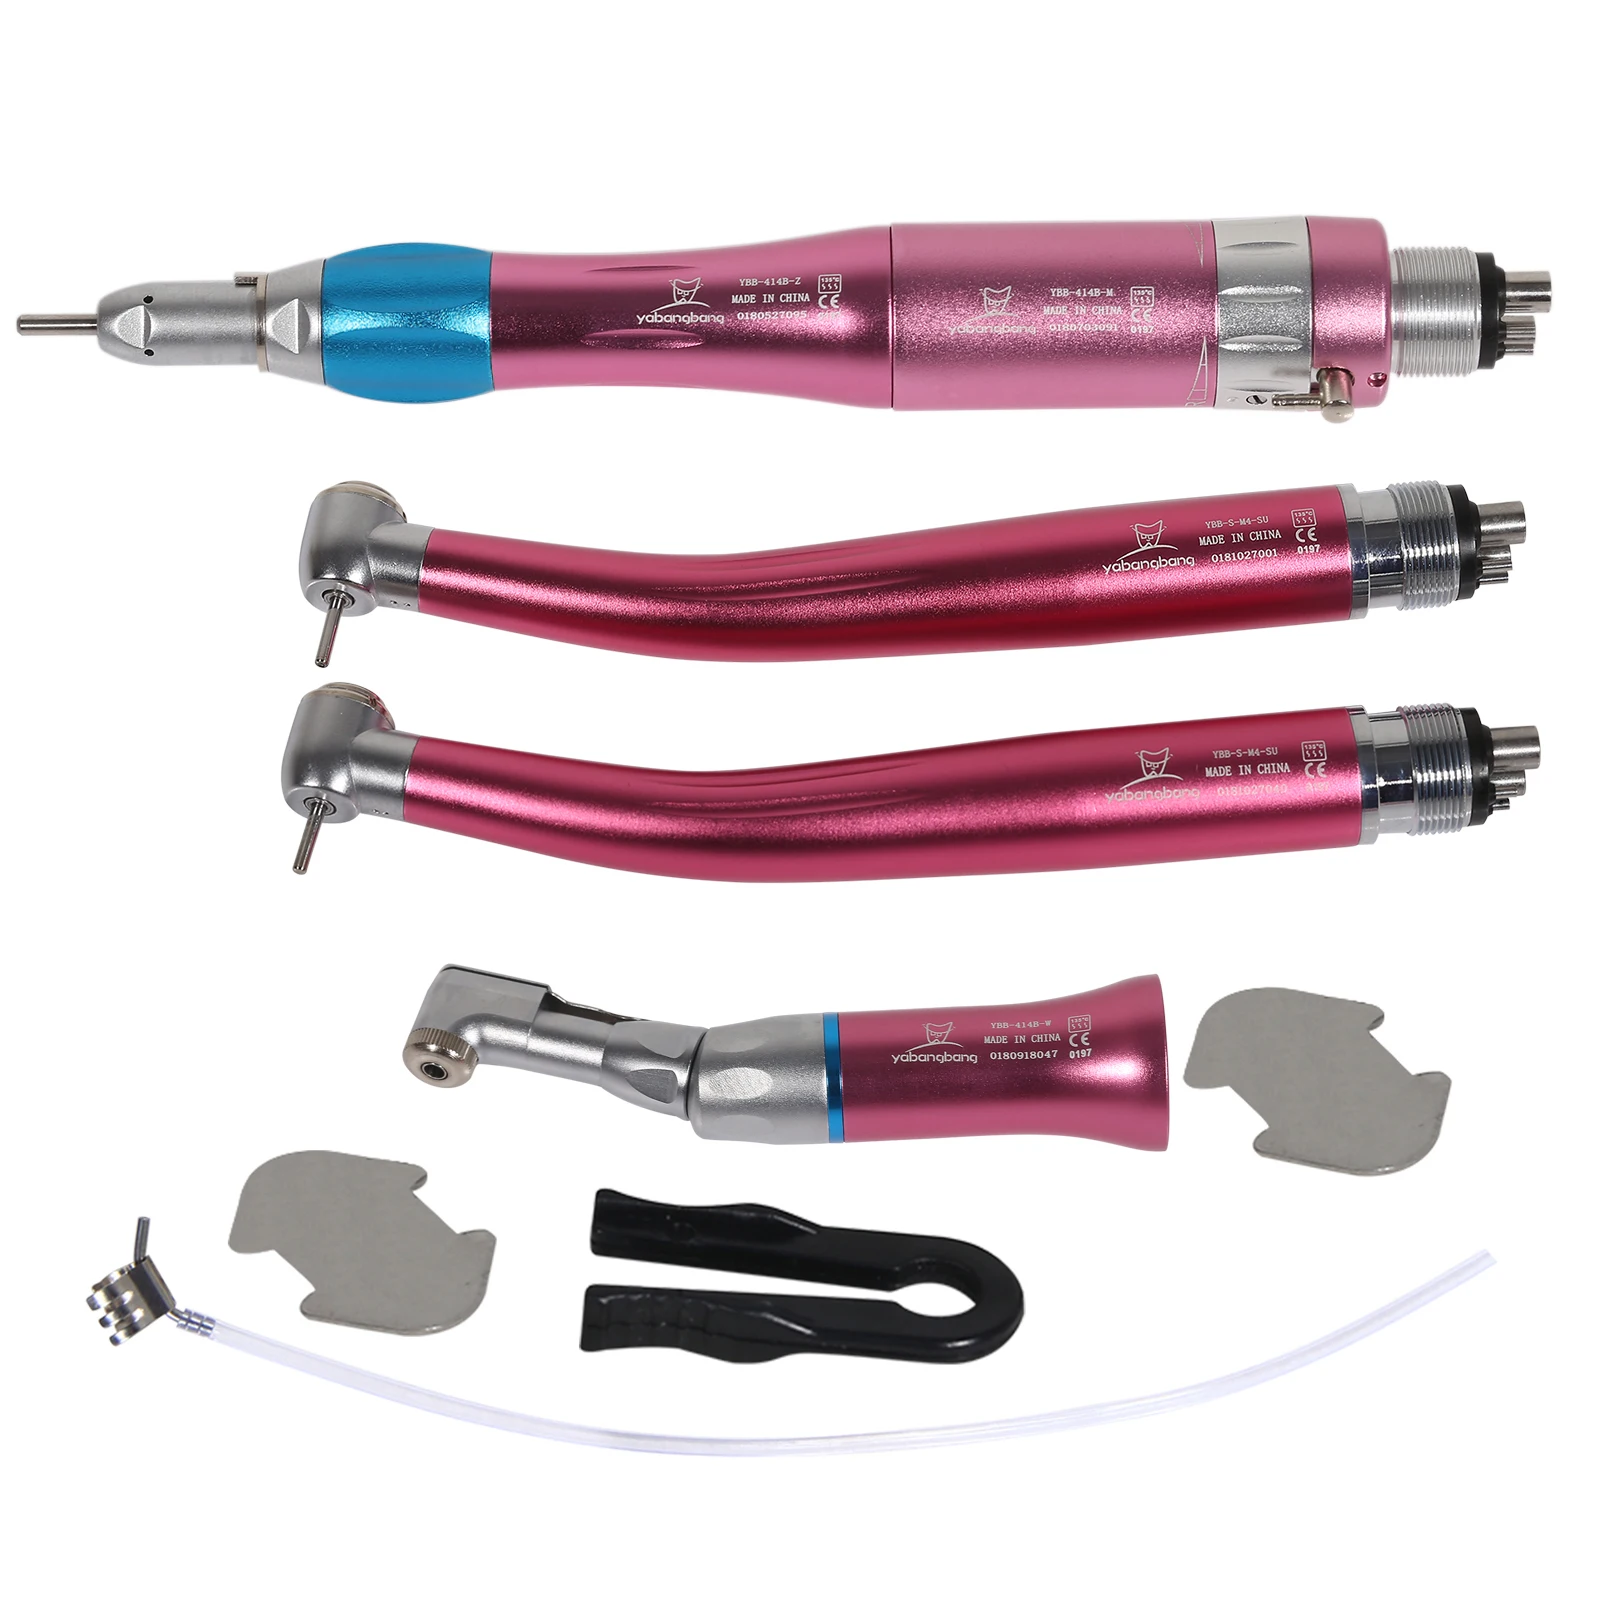 Dental 4 Holes Low/High Speed Push Button Handpiece Air Turbine Kit 1:1Ratio Pink fit NSK Style